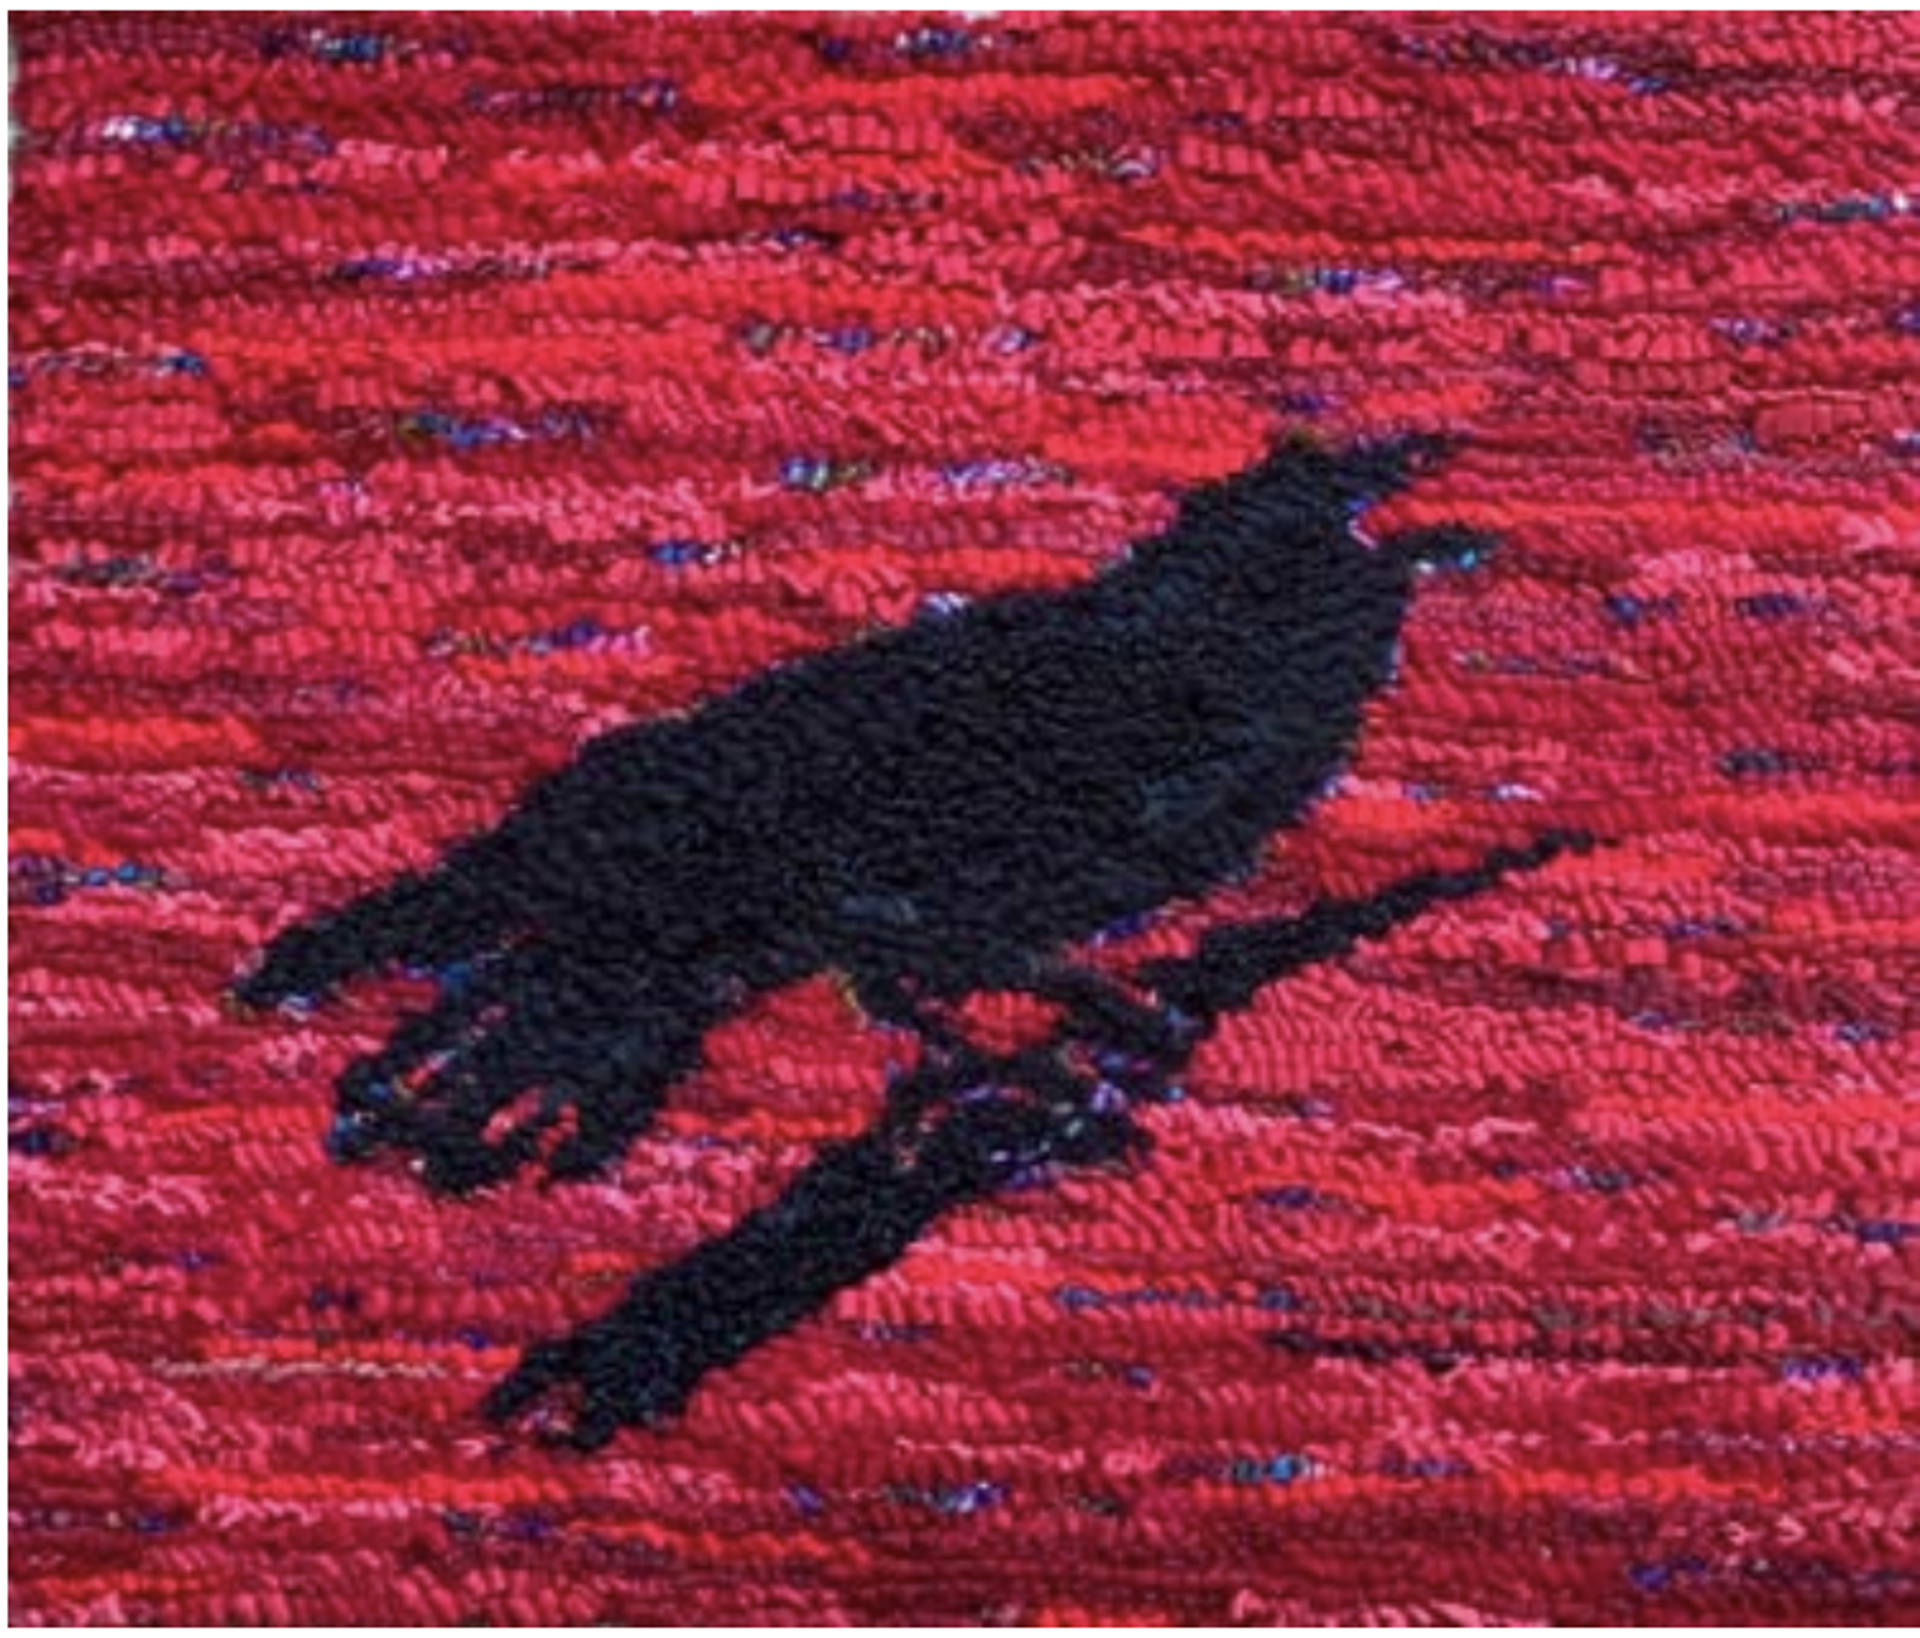 Crow Pillow 1 by Linda Smith